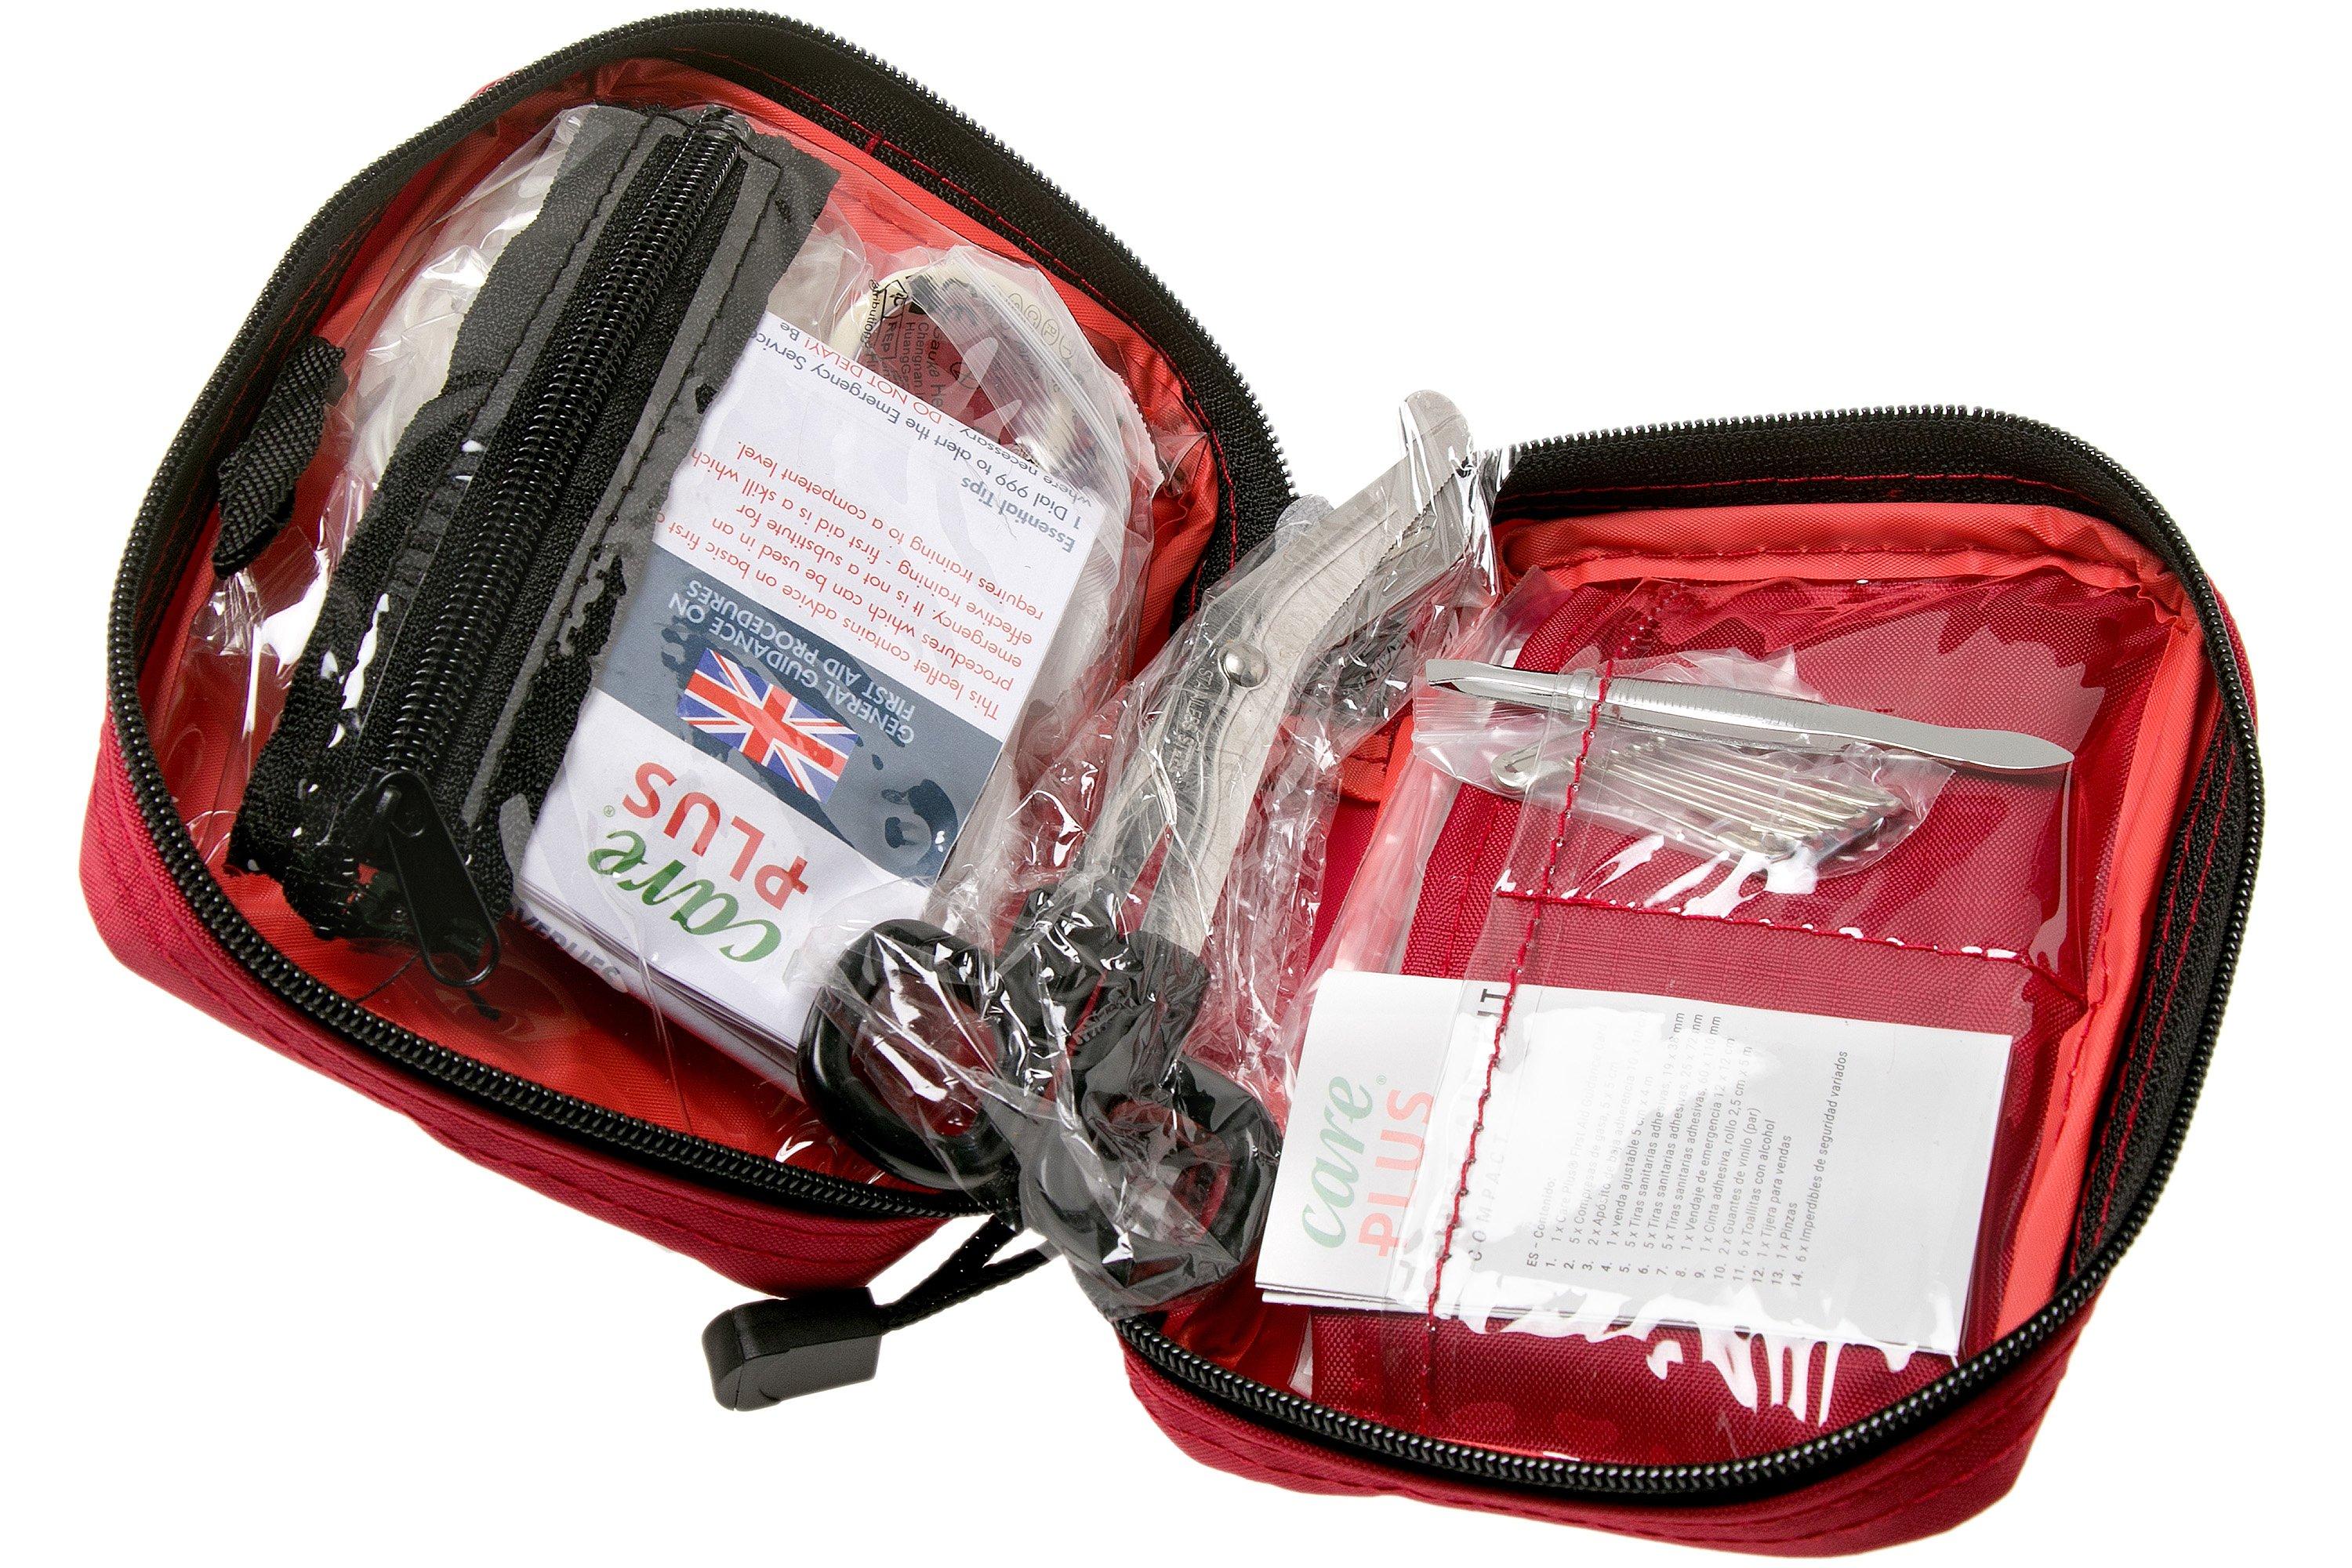 Plus First Aid Compact, first aid kit | Advantageously shopping at Knivesandtools.com